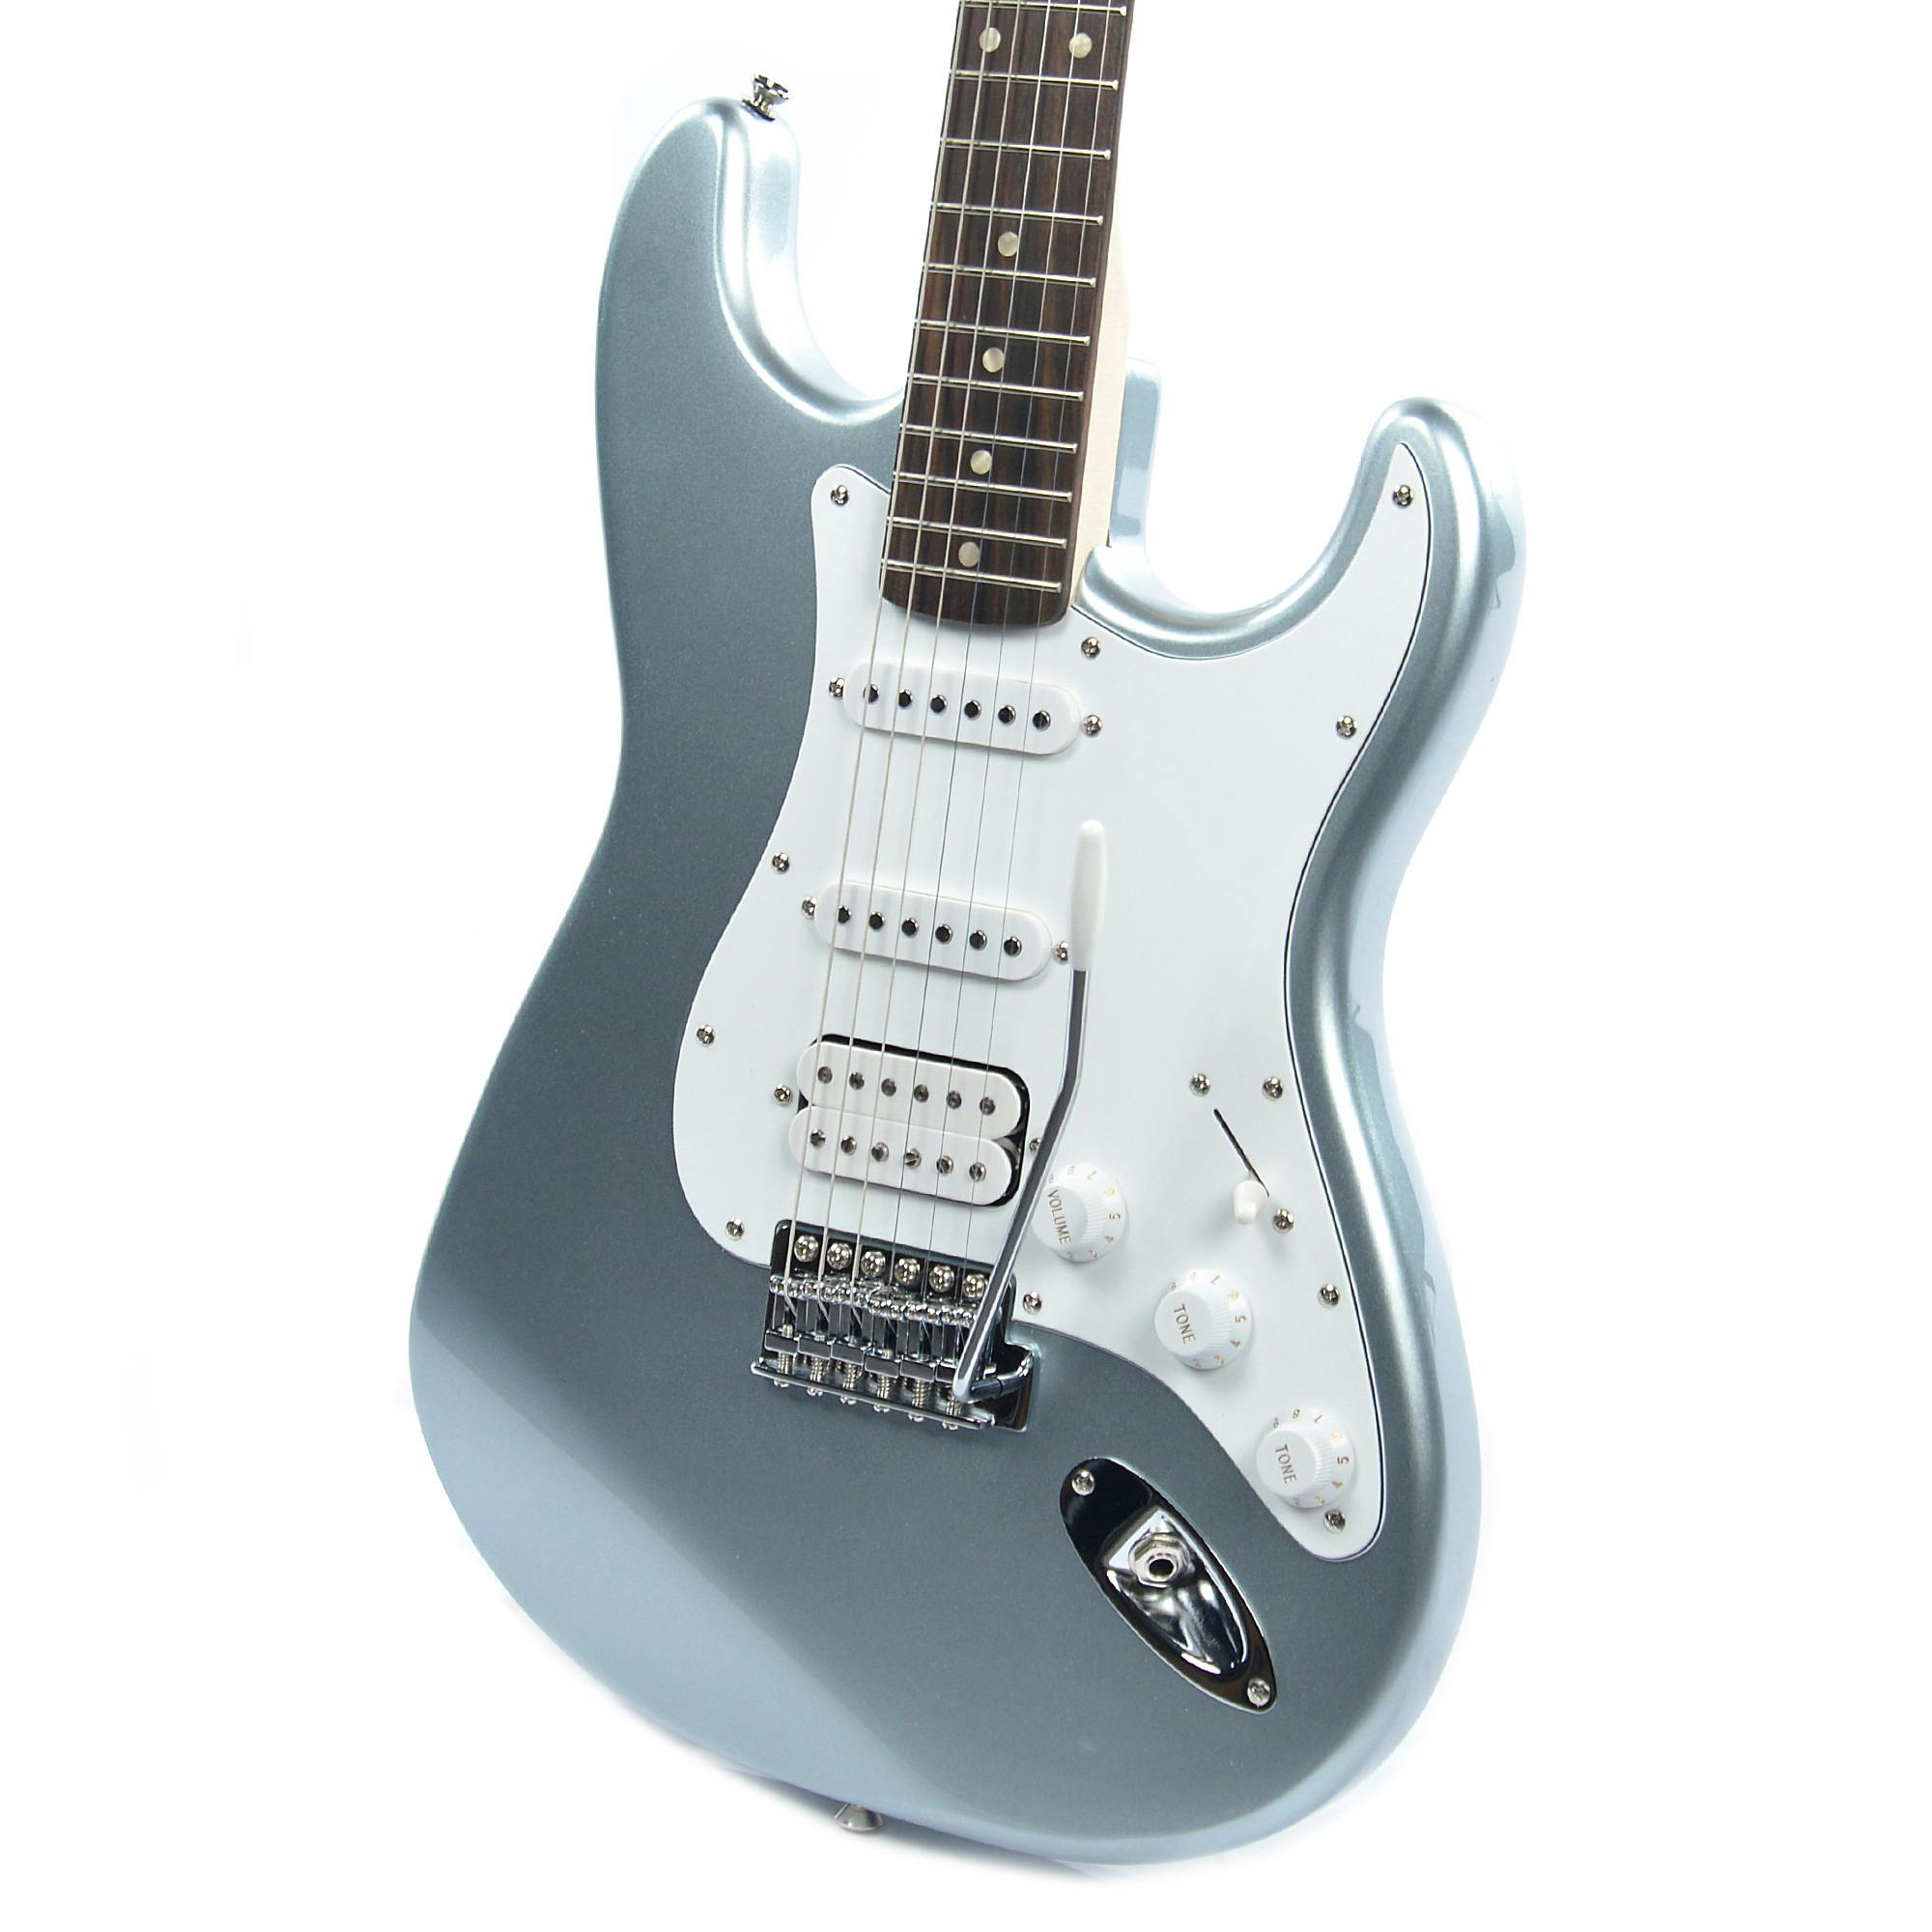 Squier affinity stratocaster. Электрогитара Squier Affinity Stratocaster HSS. Squier Affinity HSS. Squier Strat Affinity. Squier Affinity Stratocaster White.